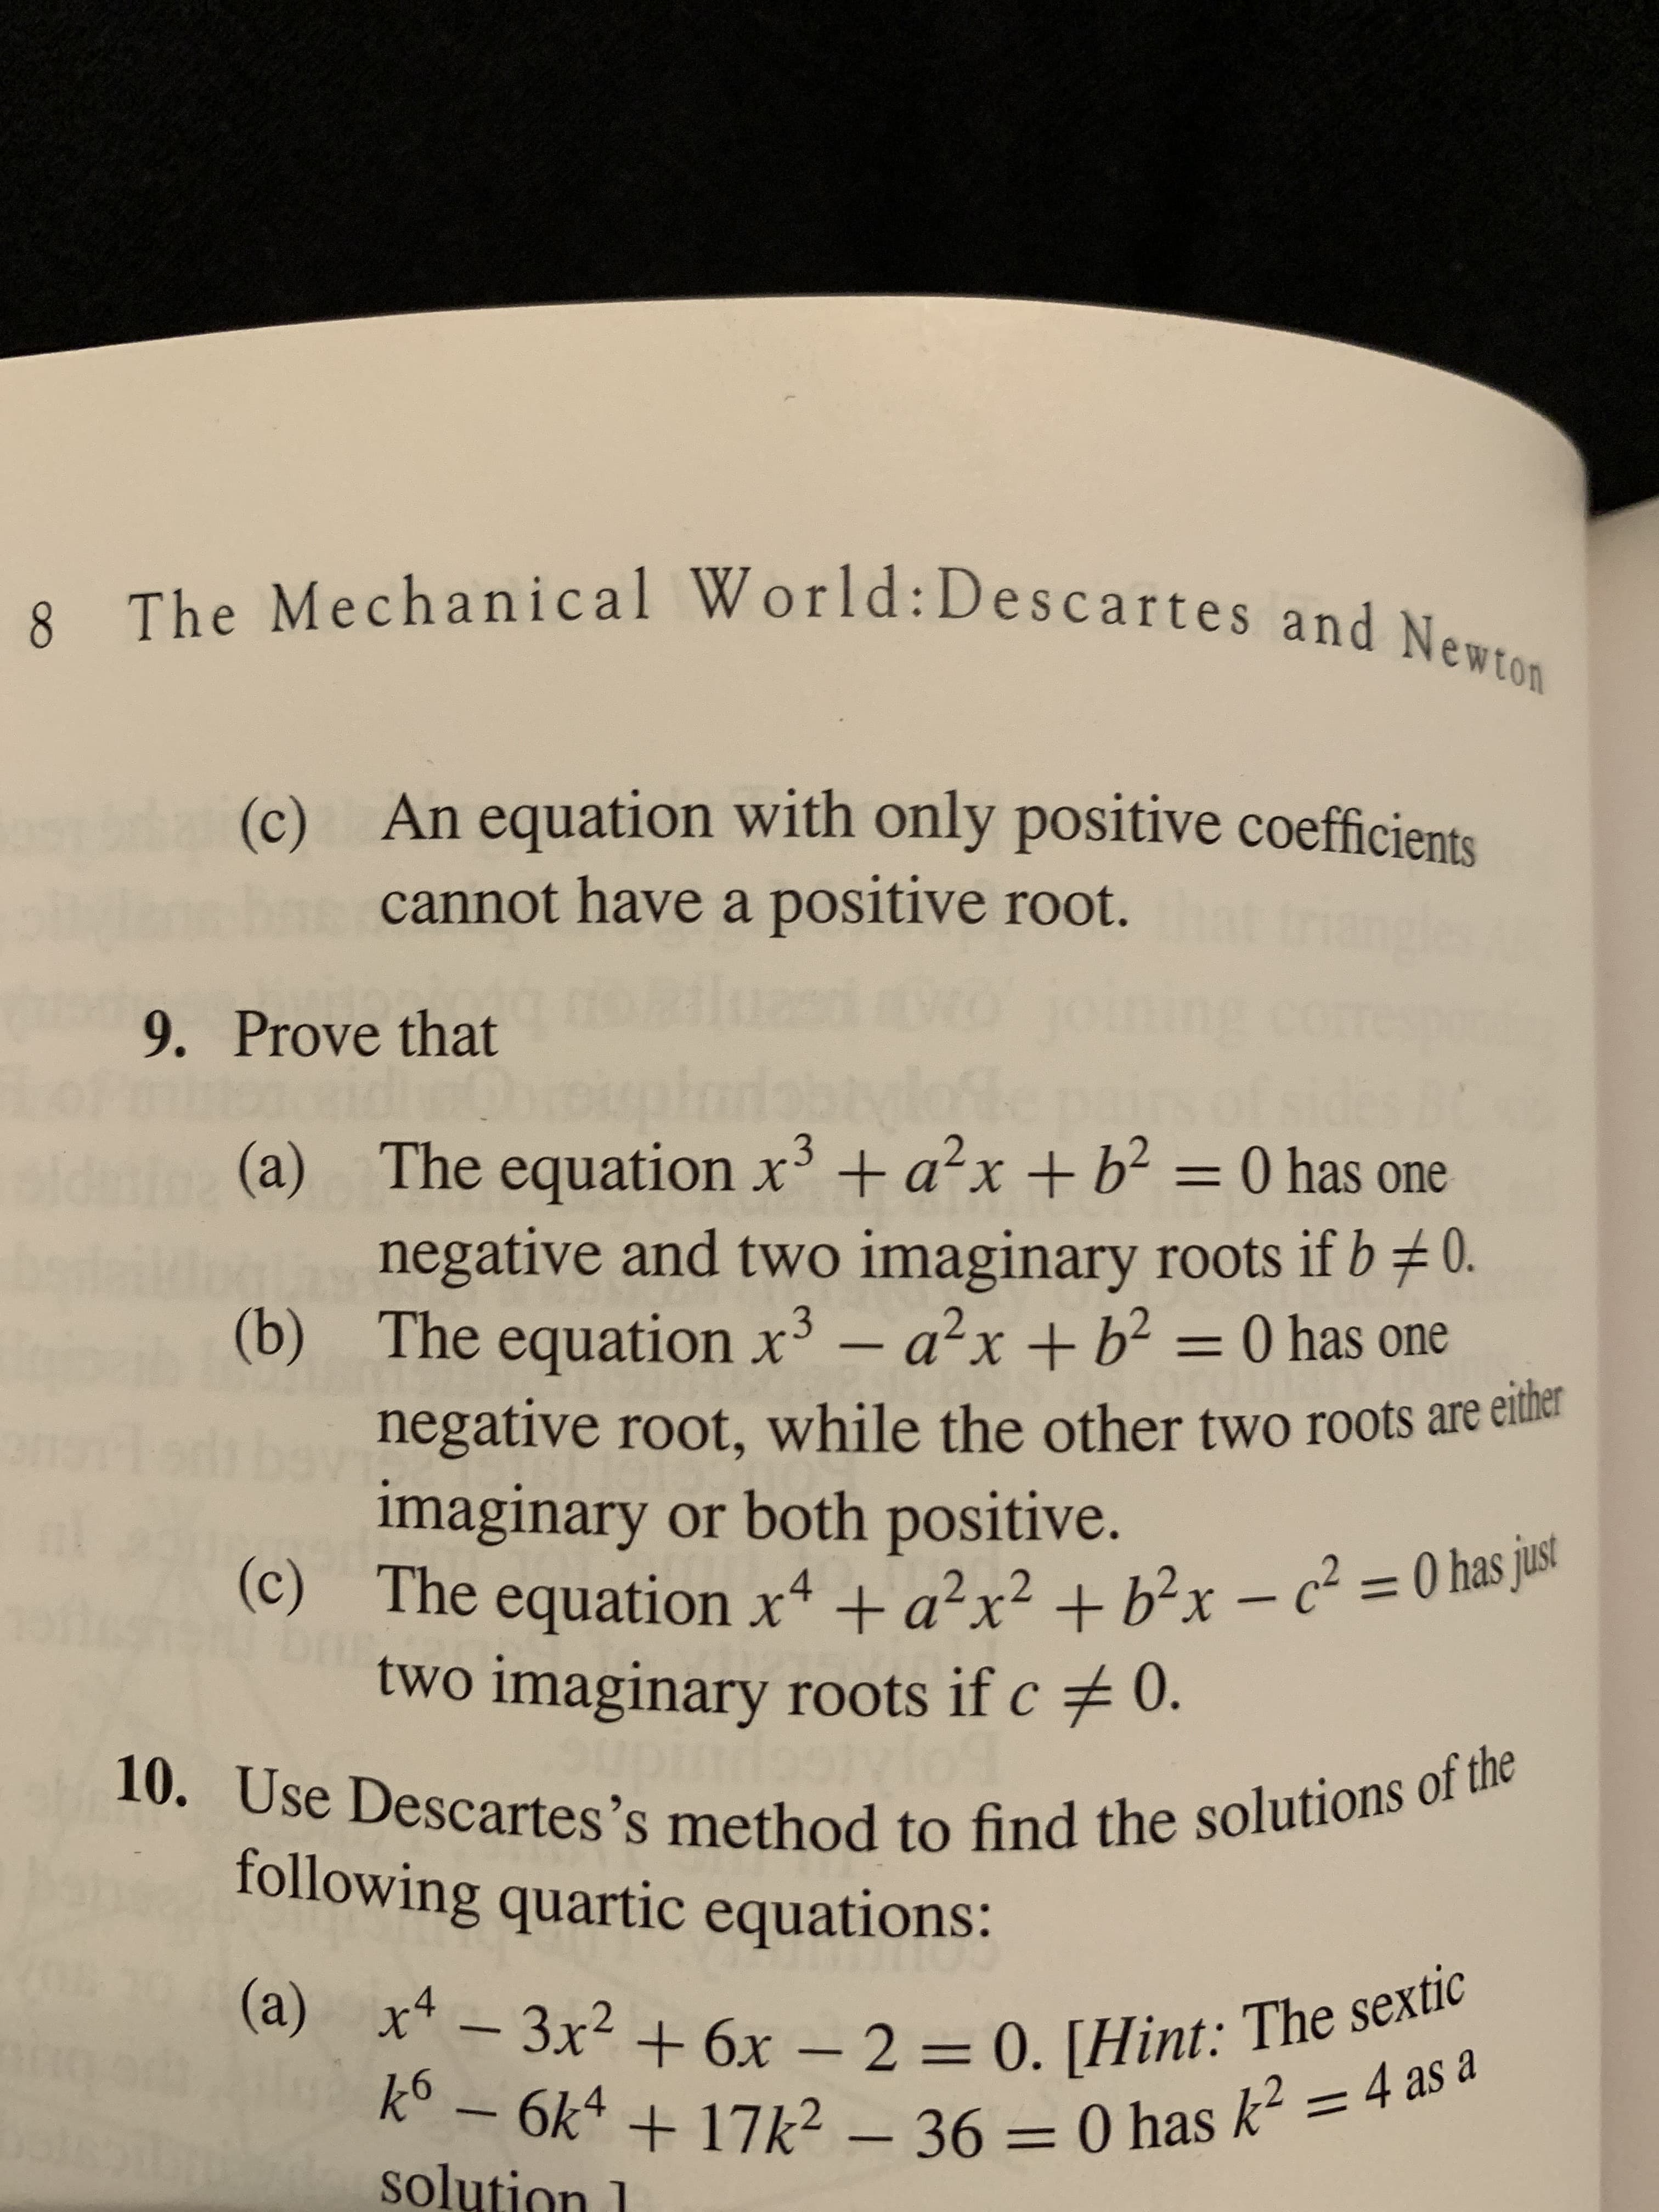 8 The Mechanical World:Descartes and Newton
8.
(c)
An equation with only positive coefficients
che
cannot have a positive root.
noailuaed ro jo
Oooiplaiabtylofle
sidnin (a) The equation x³+a?x+b² = 0 has one
negative and two imaginary roots if b0.
(b) The equation x³ – a²x + b² = 0 has one
negative root, while the other two roots are either
imaginary or both positive.
(c) The equation x4 + a²x² + b²x – c² = 0 has just
two imaginary roots if c 0.
corme
9. Prove that
Modi be
brur
10. Use Descartes's method to find the solutions of the
following quartic equations:
(a) x4 - 3x2 + 6x – 2 = 0. [Hint: The sextic
Ok* + 17k2 – 36 = 0 has k? = 4 as
solution 1
%3D
